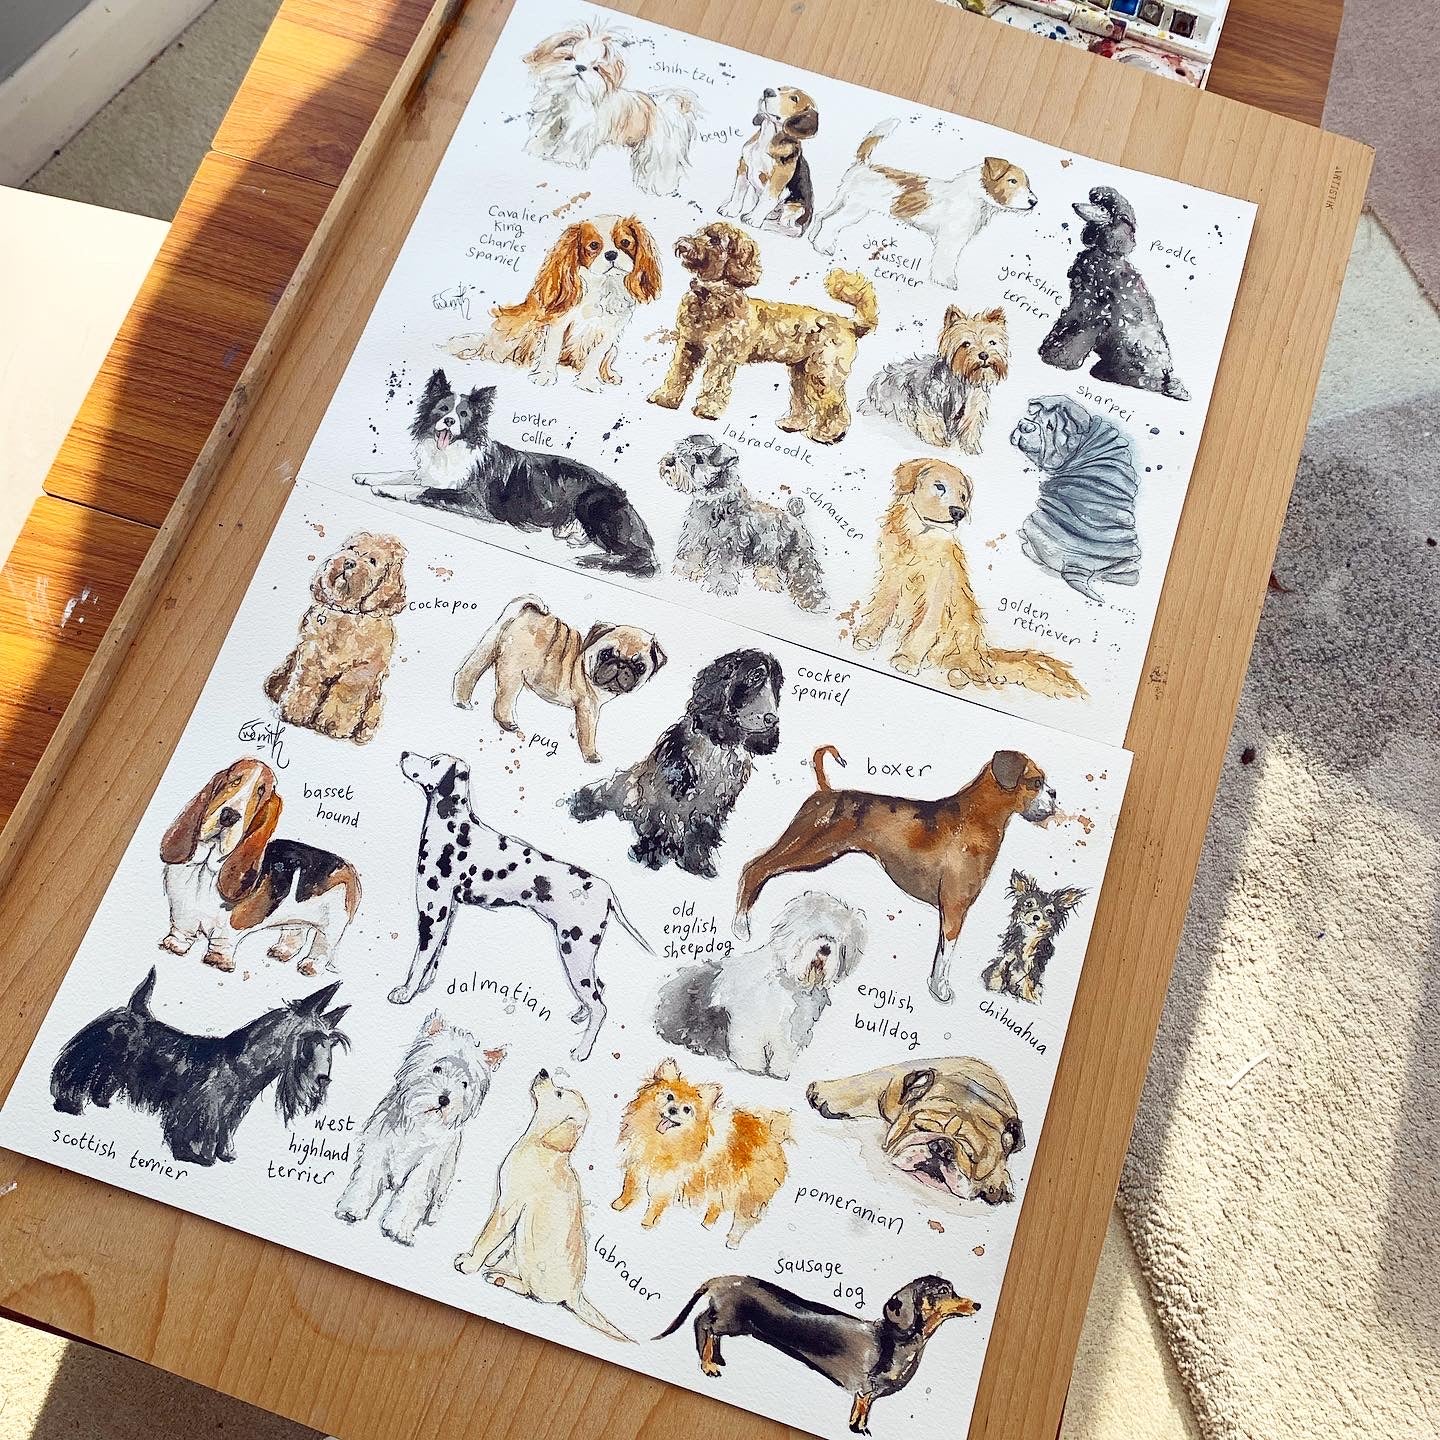 Original watercolour illustrations of different dog breeds by local Cleethorpes artist, Eve Leoni.